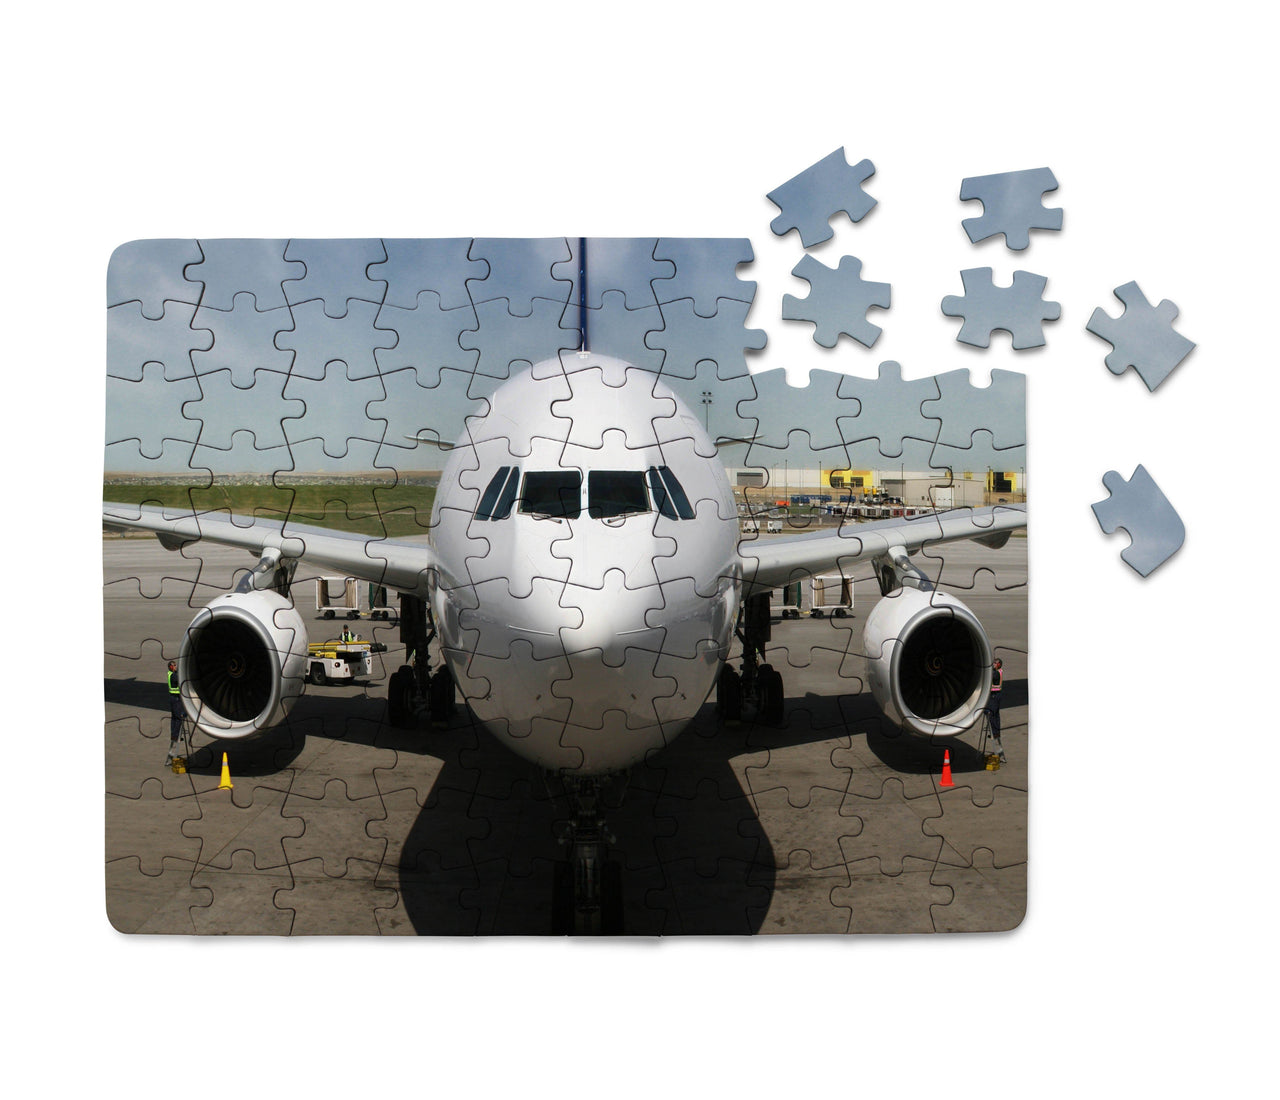 Face to Face with an Huge Airbus Printed Puzzles Aviation Shop 